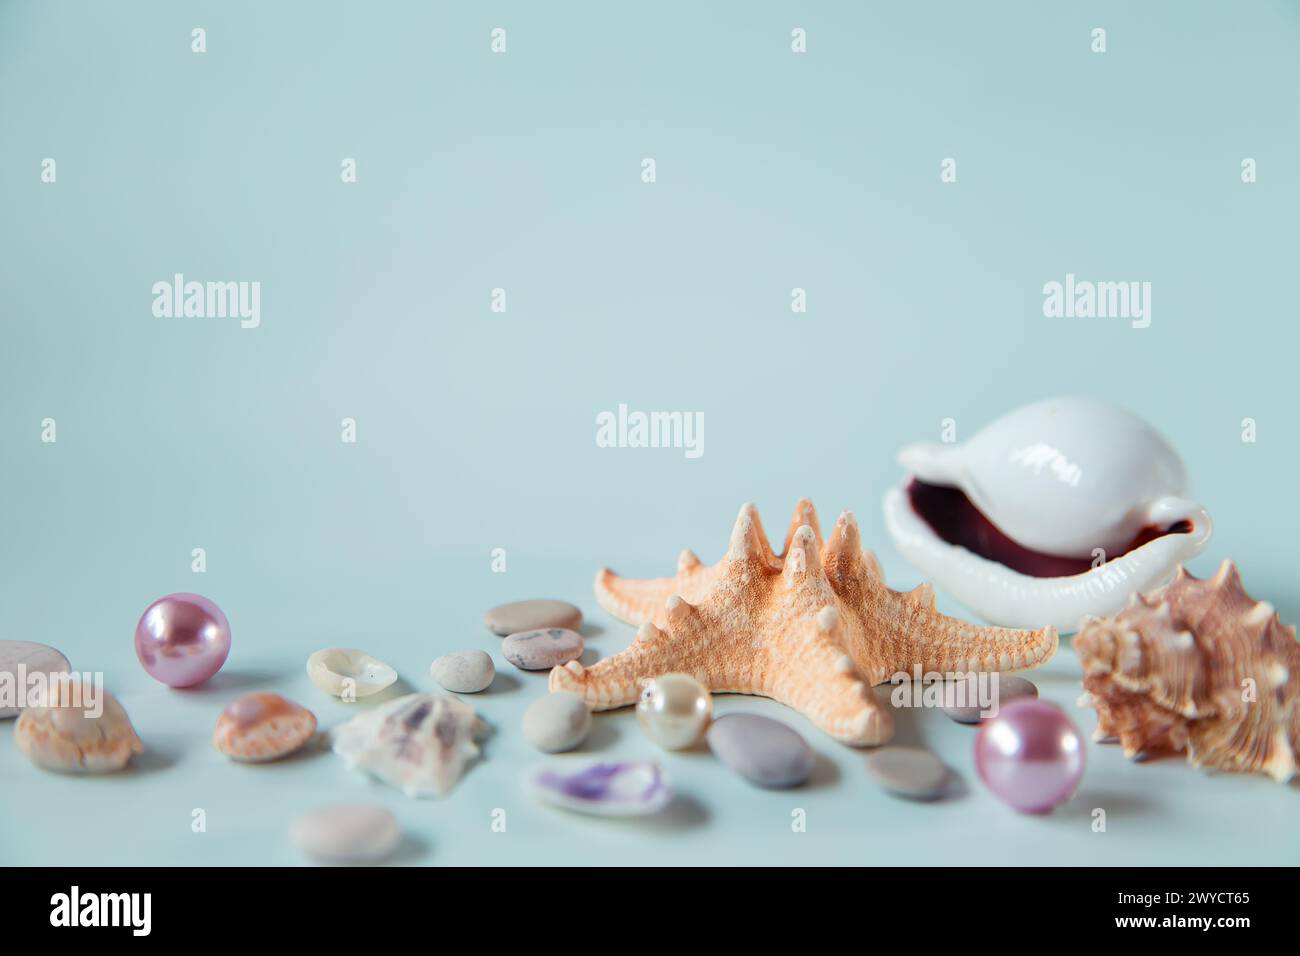 Seashells, starfish and pearls on a gray background. Tropical summer background, free space for your decoration. Stock Photo